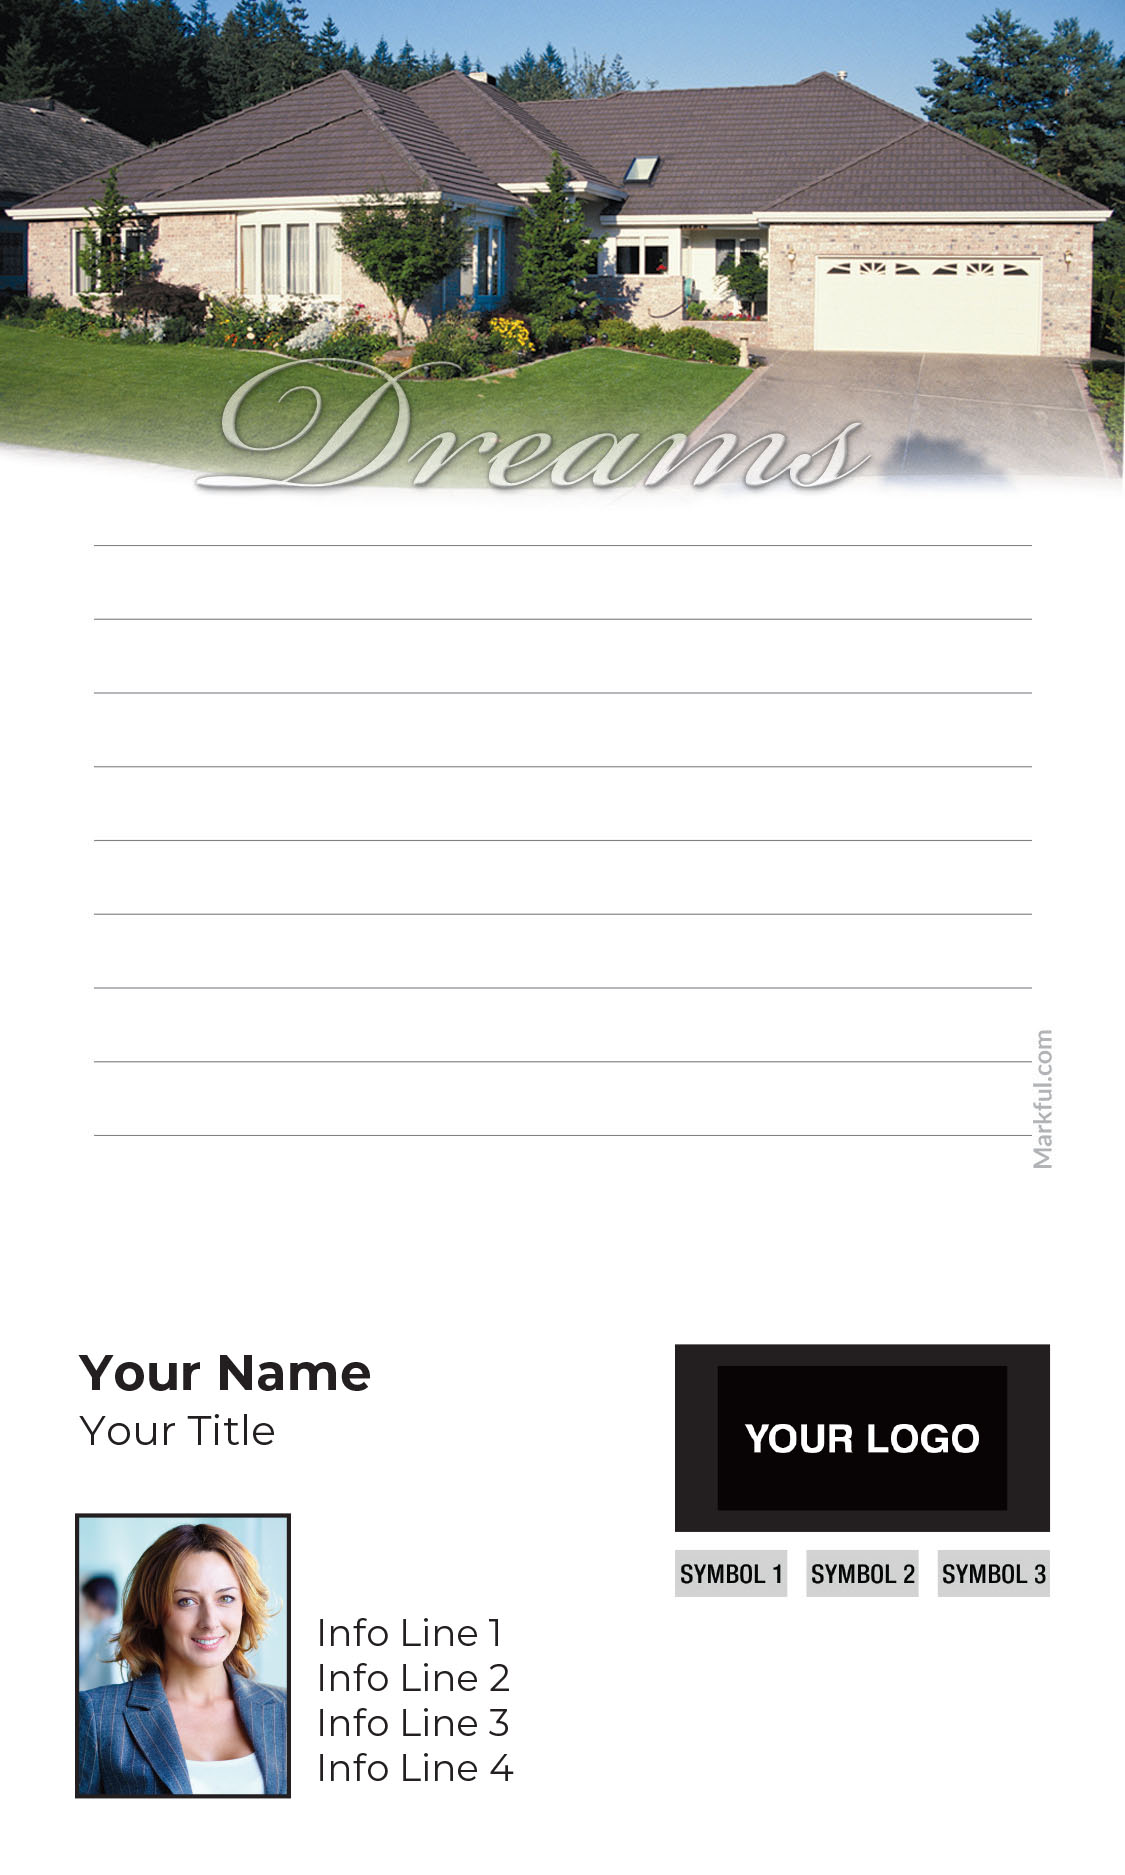 Picture of Custom Notepads - Dreams